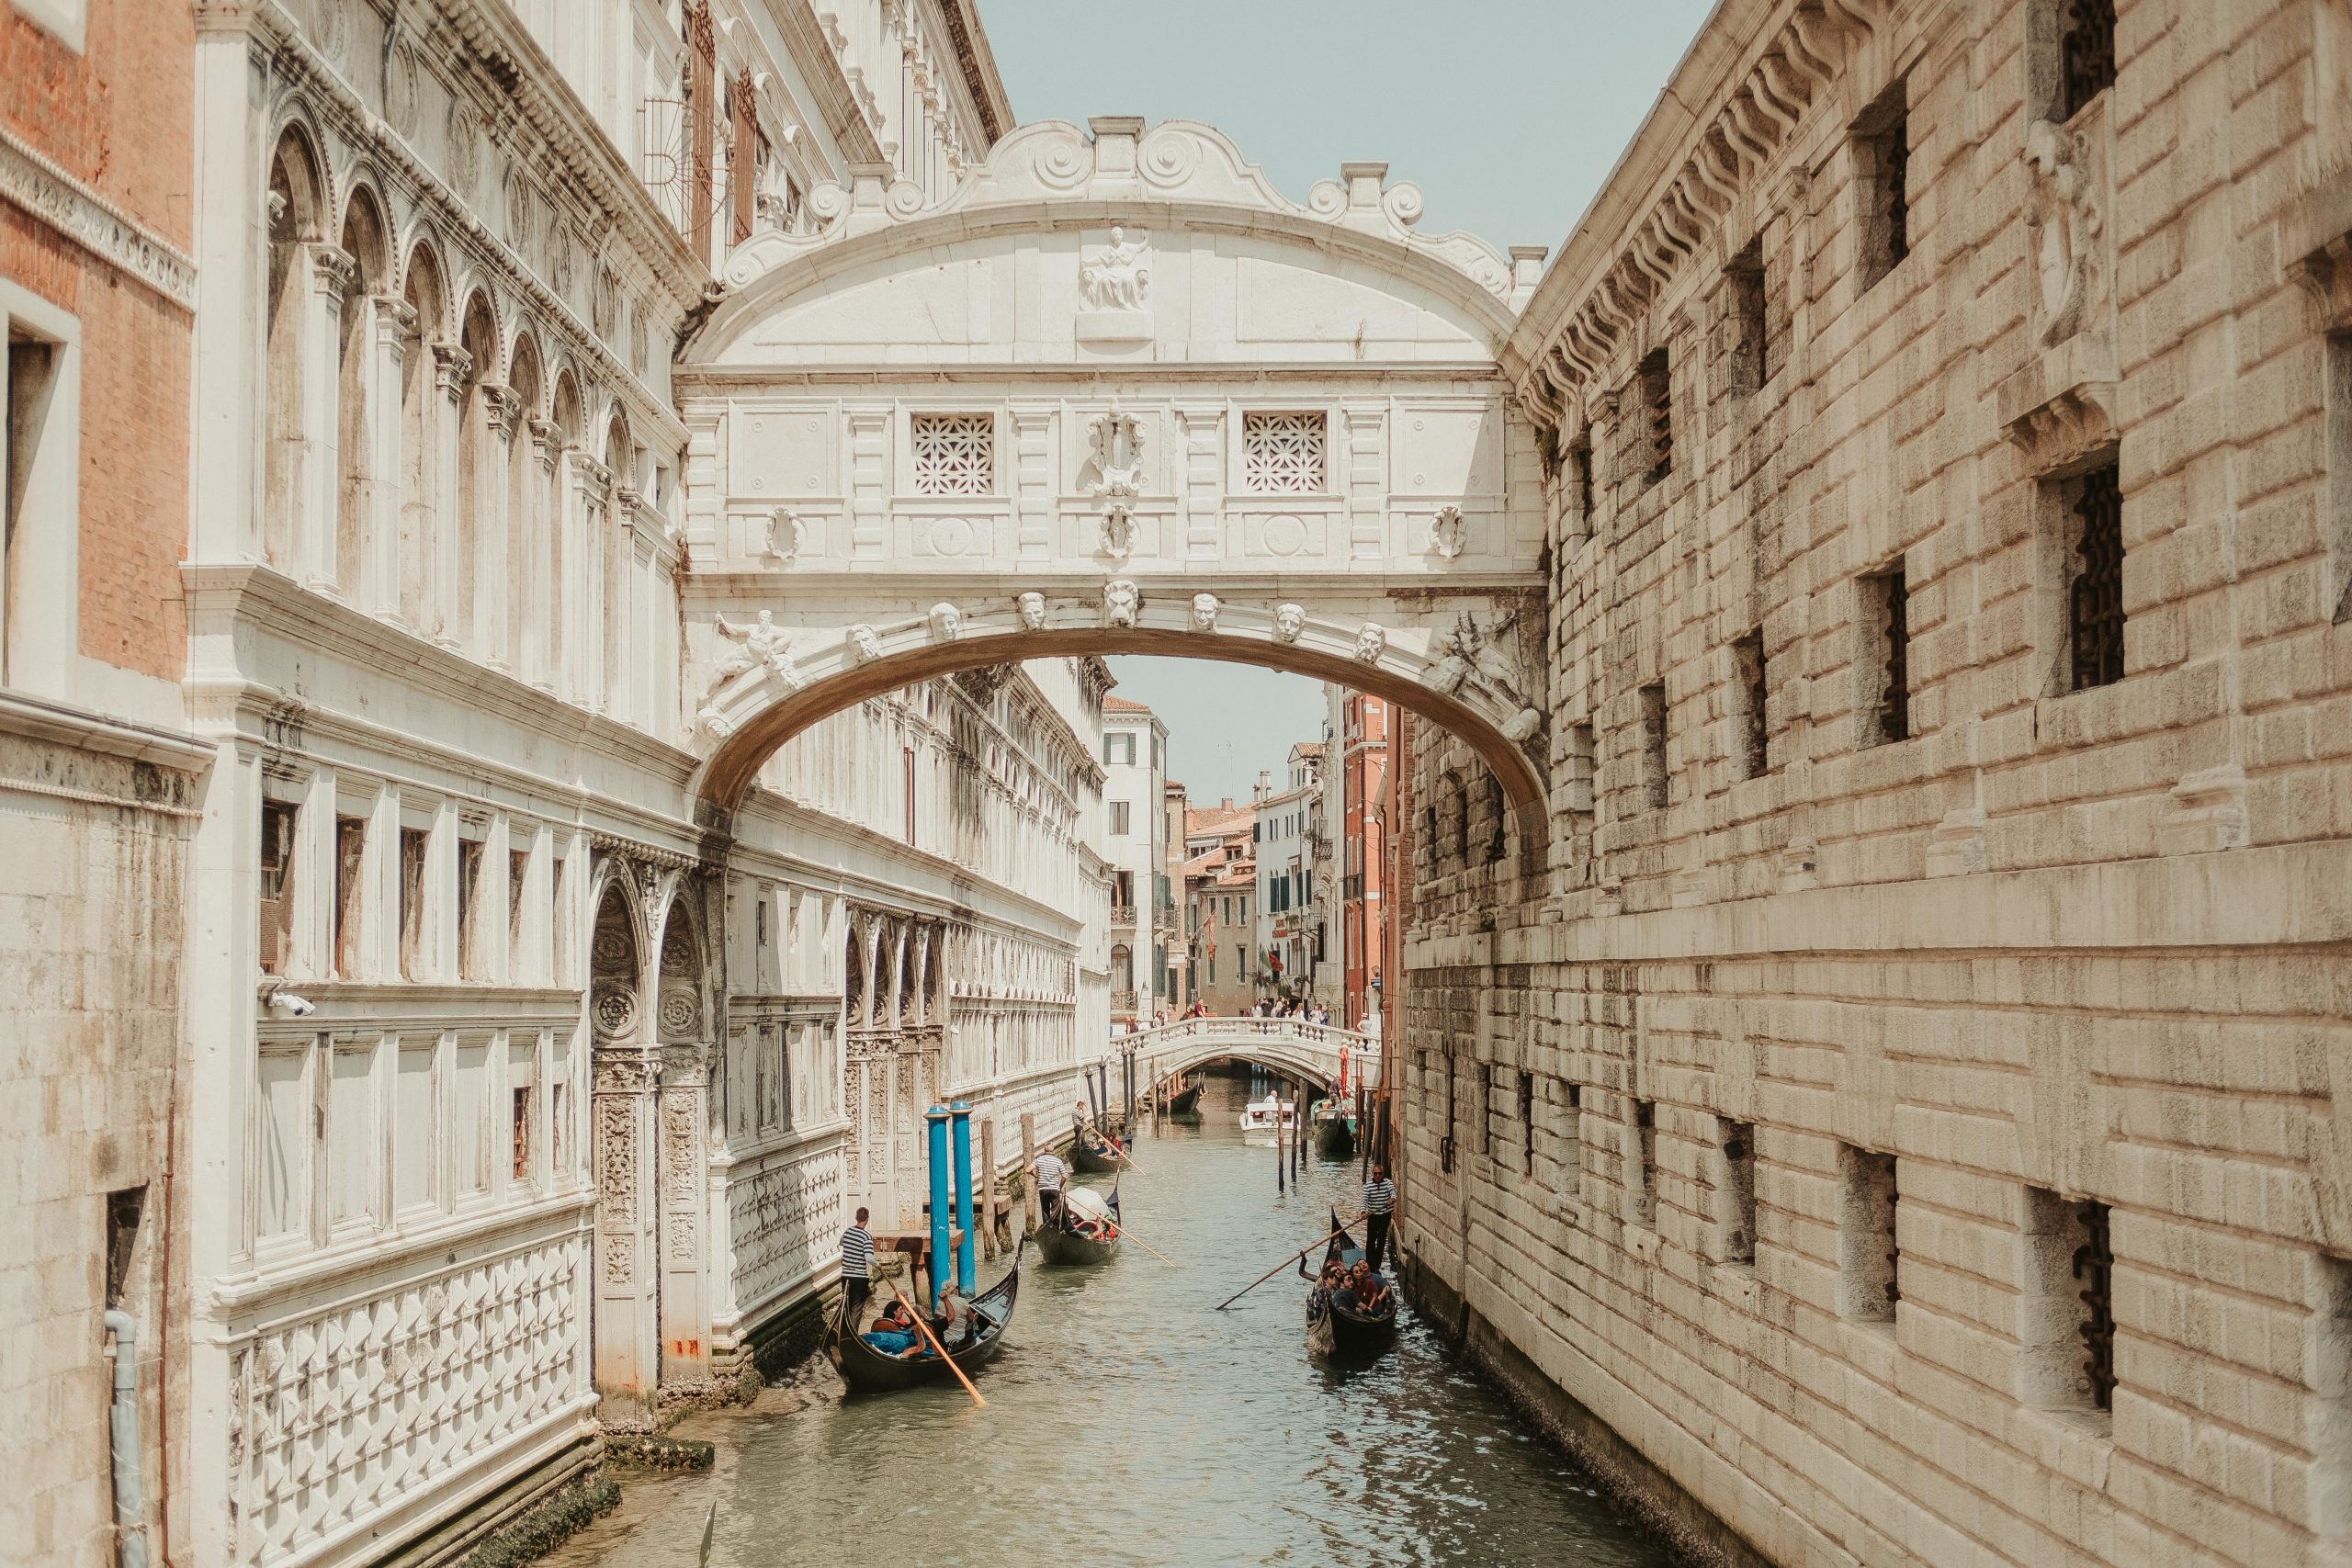 Stunning Venetian canal with Gondoliers along the waters